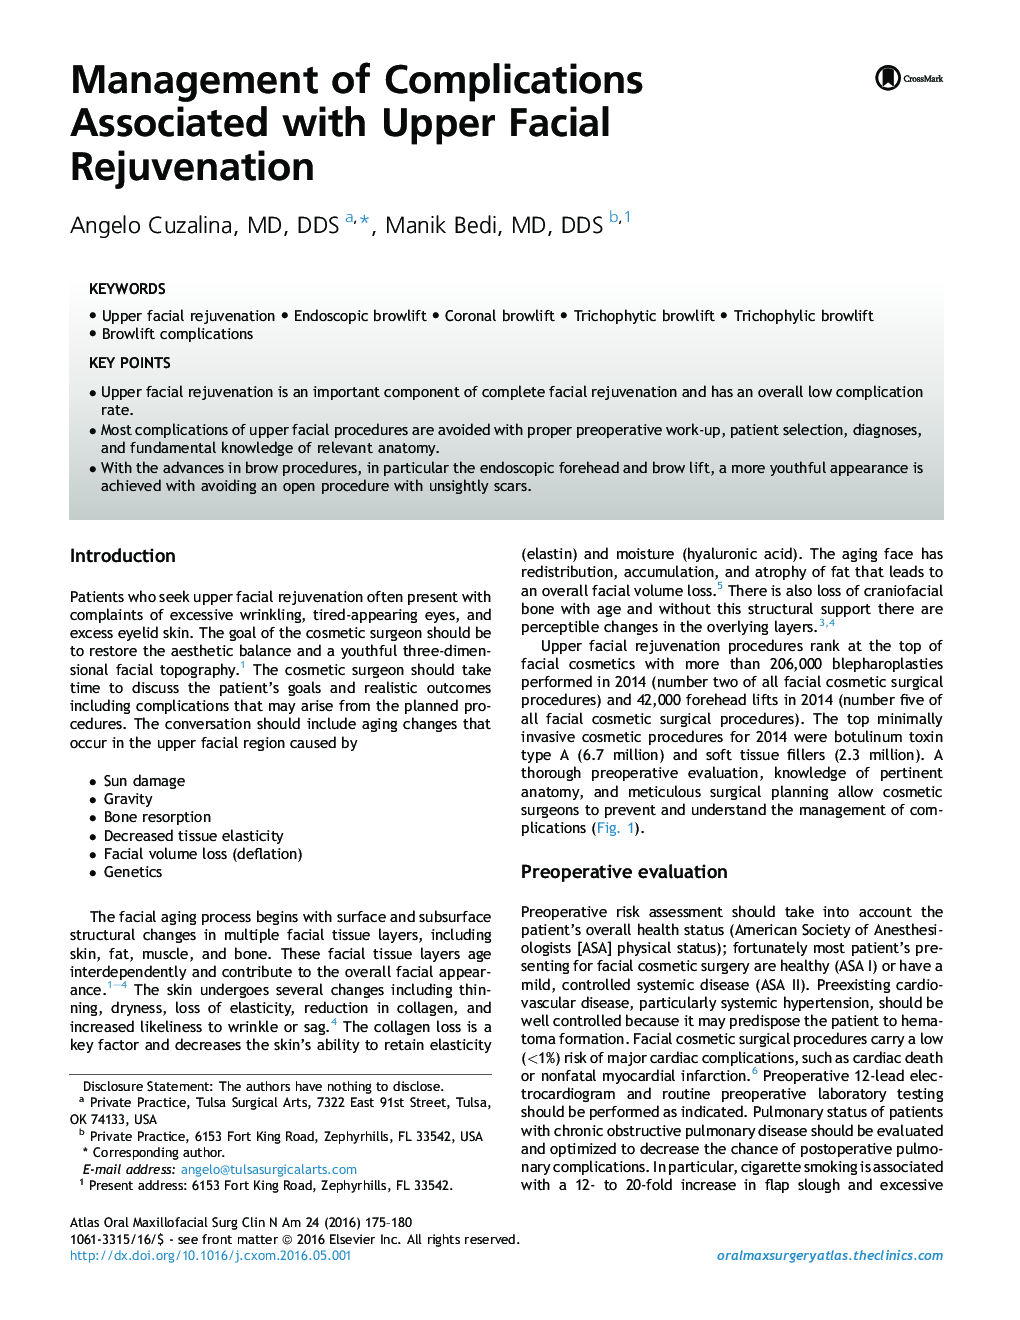 Management of Complications Associated with Upper Facial Rejuvenation